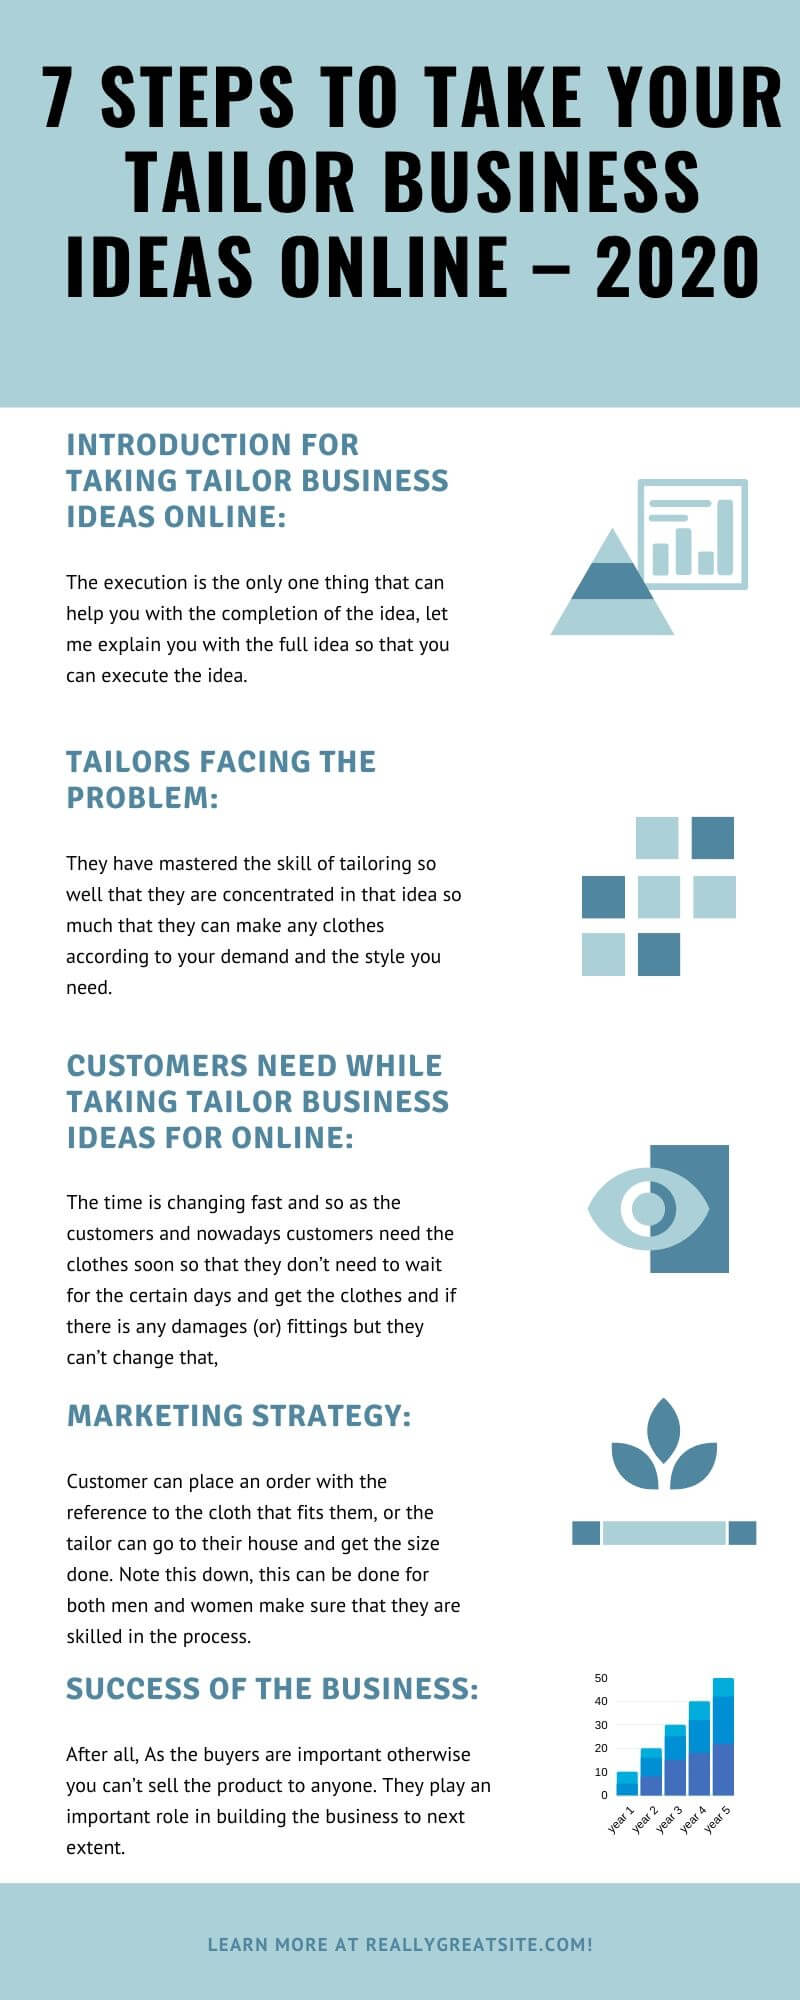 7 Steps to Take your Tailor Business Ideas Online – 2020